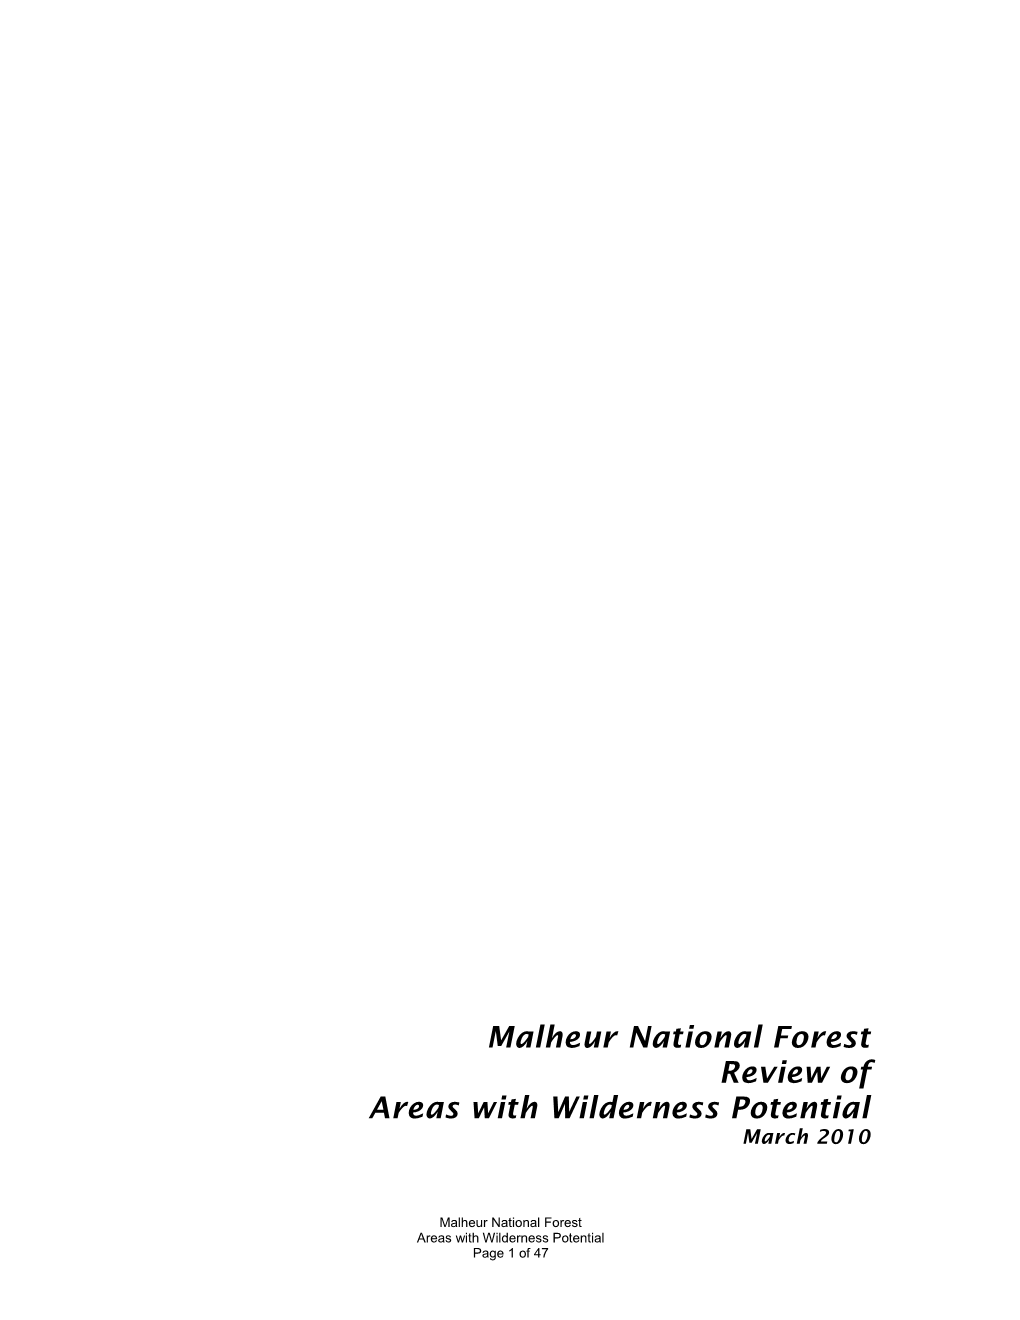 Malheur National Forest Review of Areas with Wilderness Potential March 2010